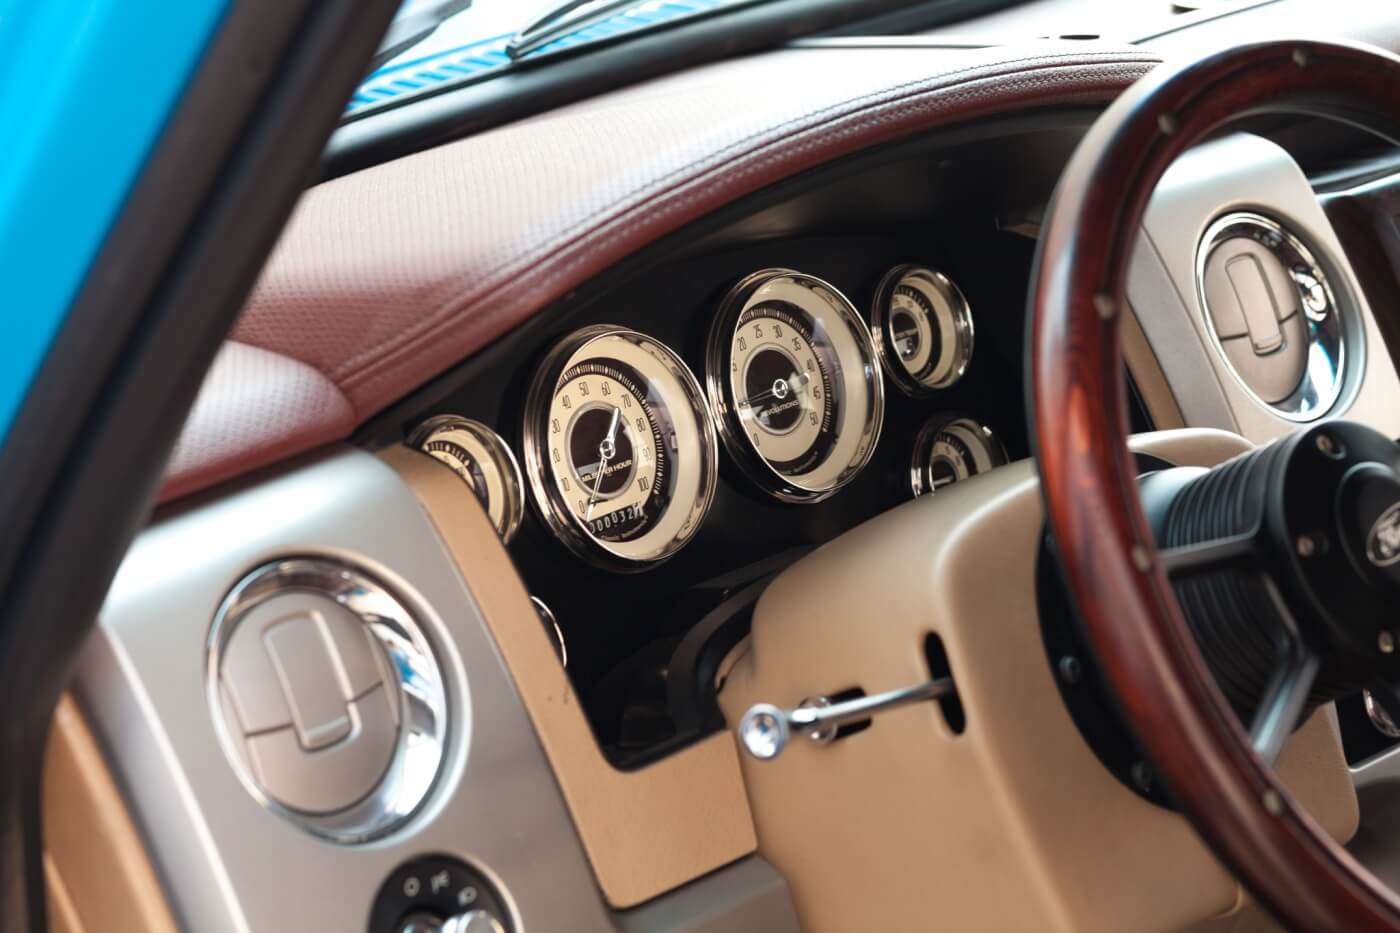 All the gauges, switches and air vents—including the rear vents on the 2012 dash—work flawlessly.